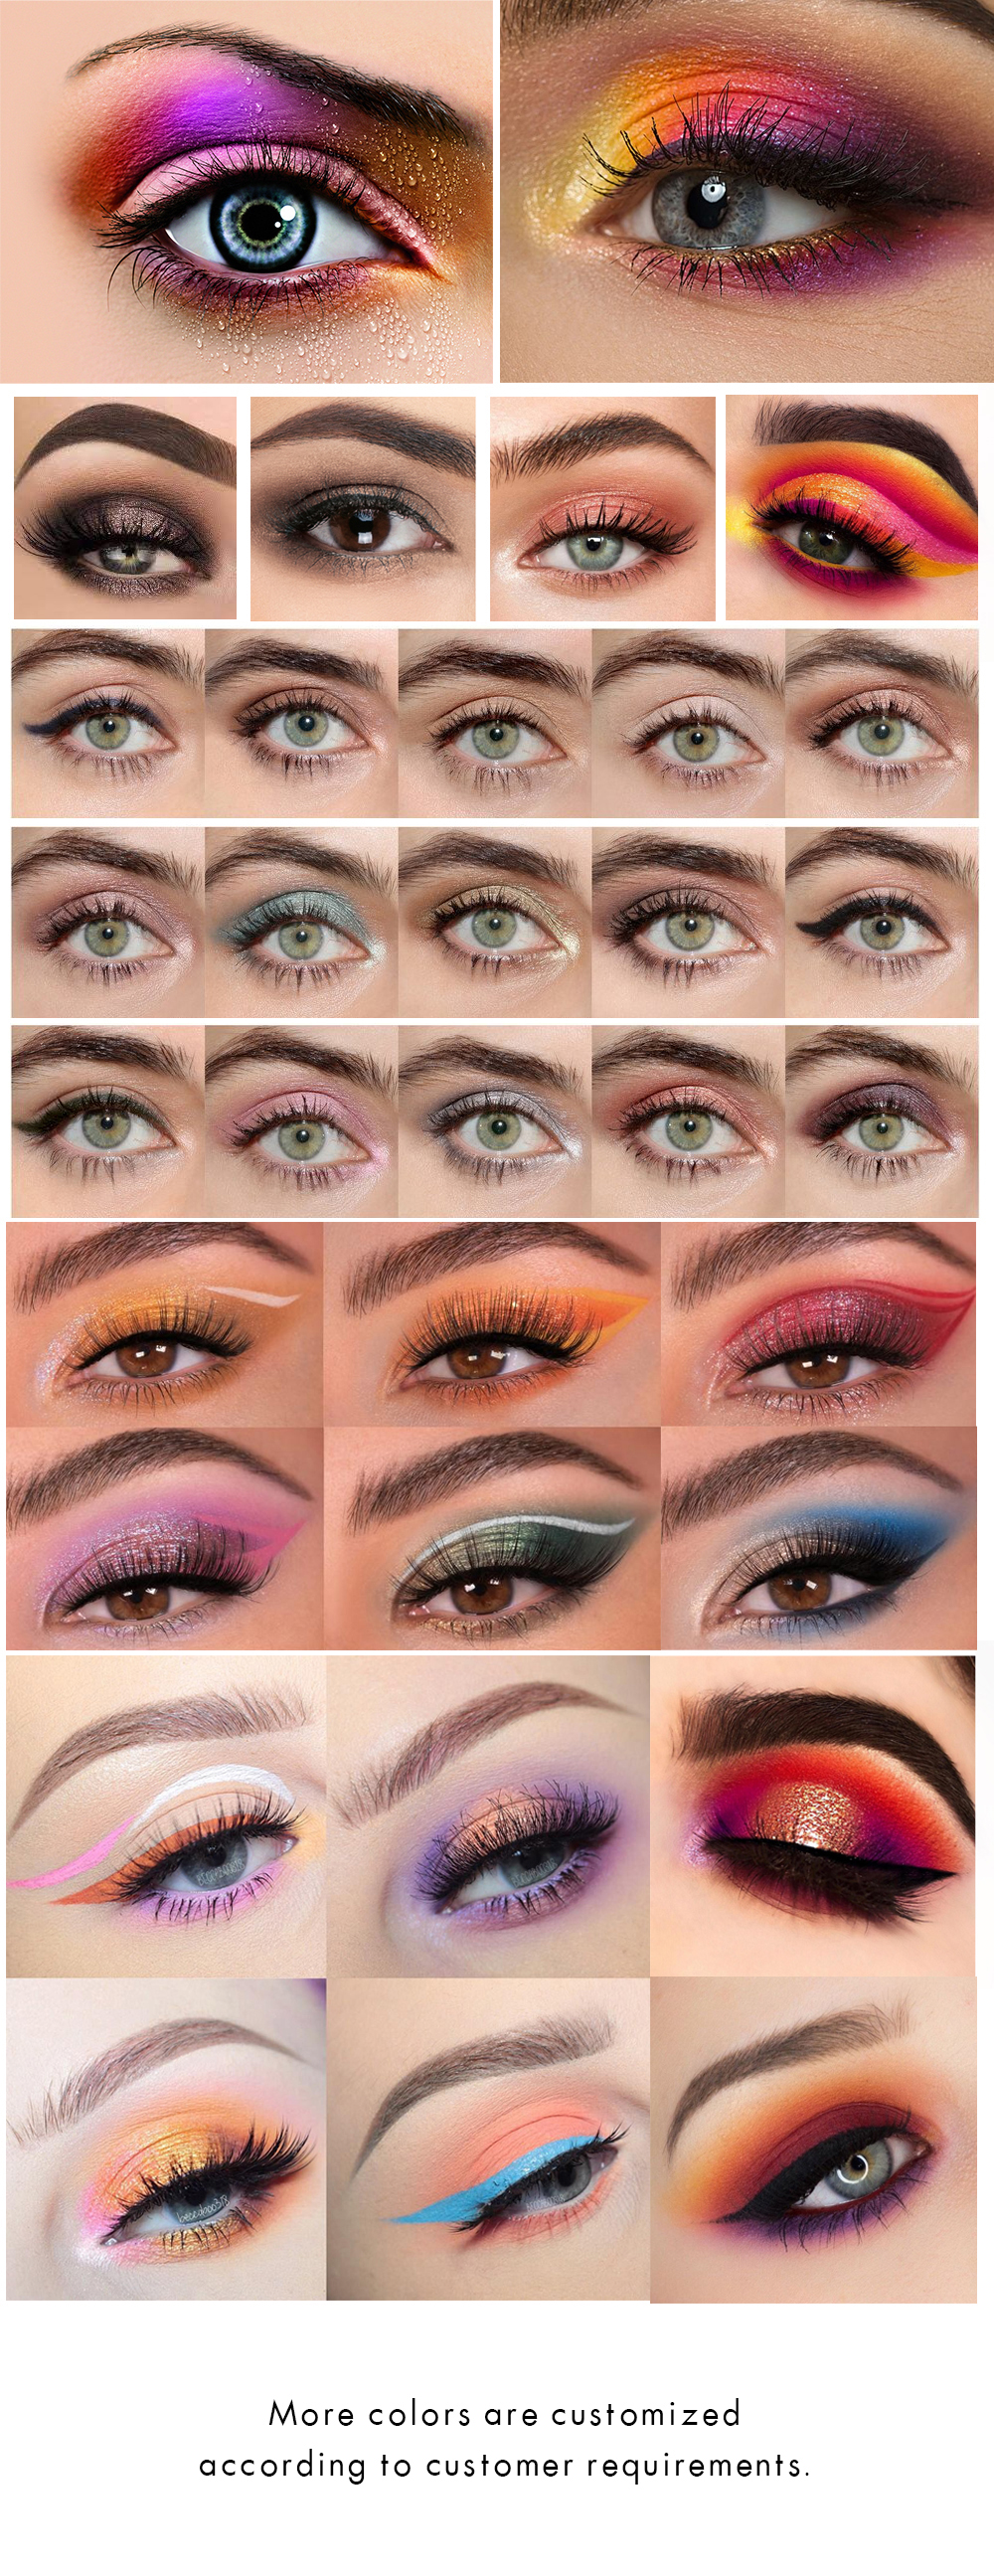 2. Four-color eyeshadow color card